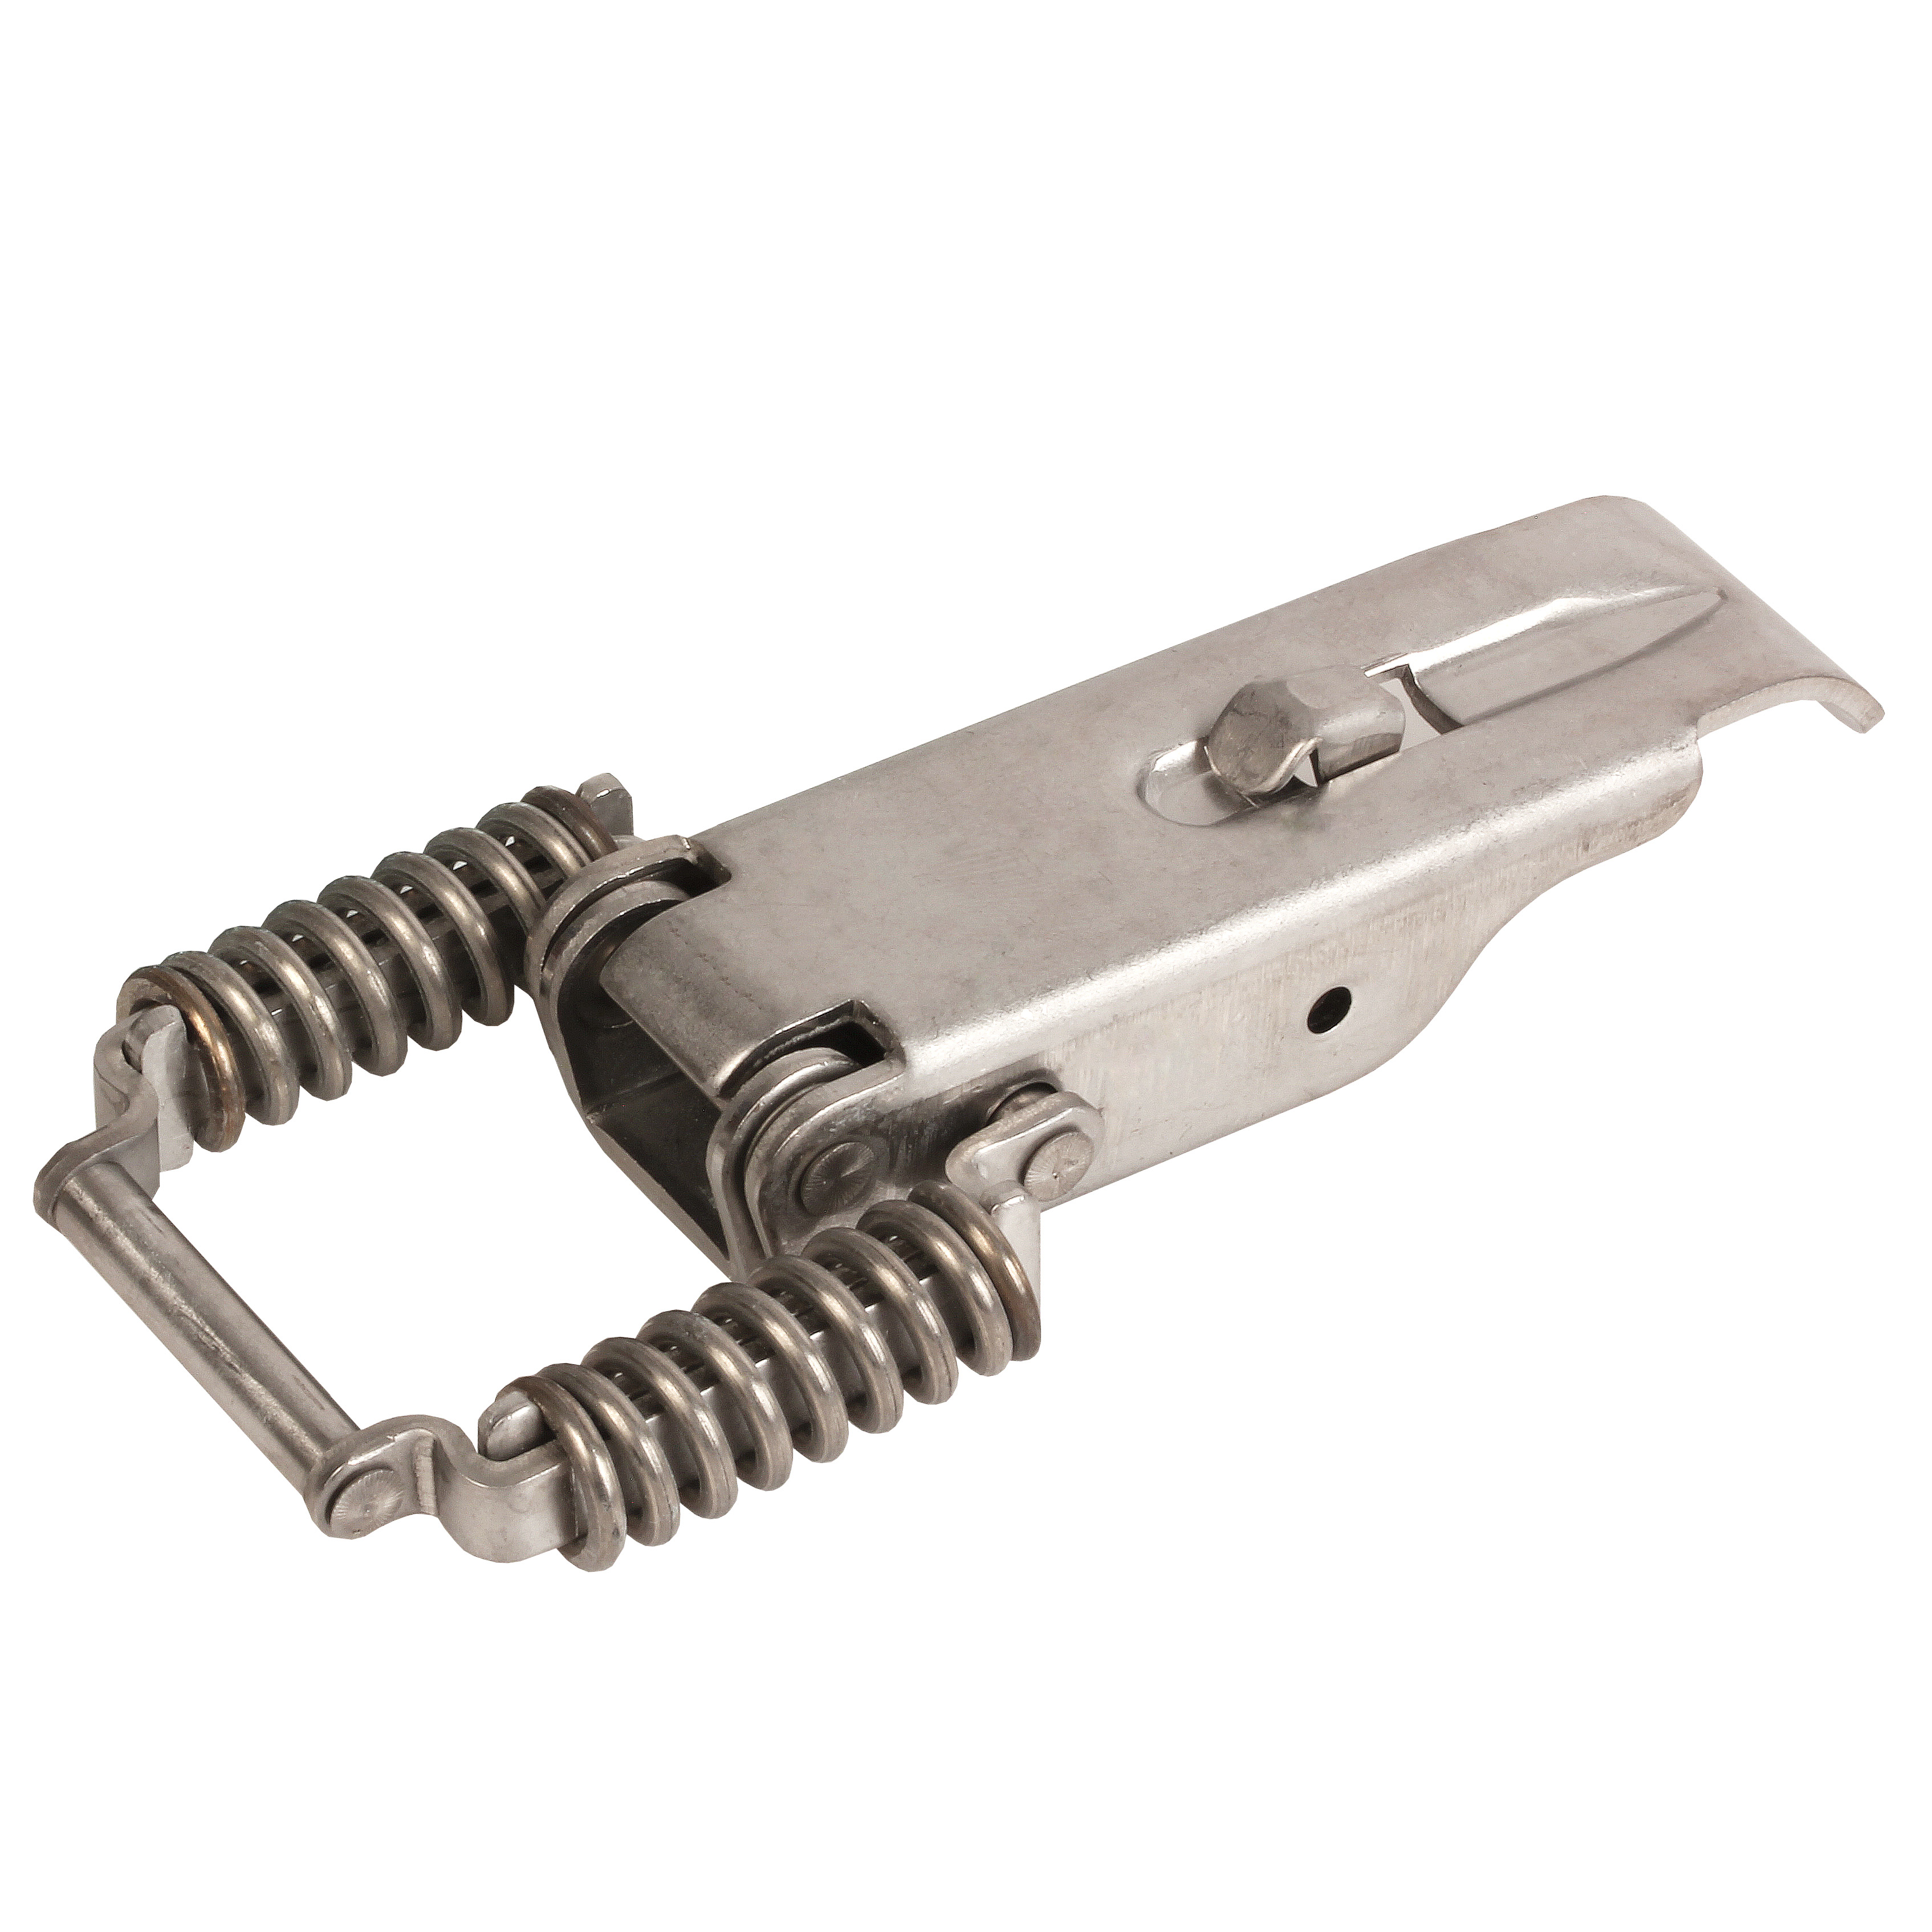 Spring loaded toggle latch - Standard  (GP75) - Stainless steel - 